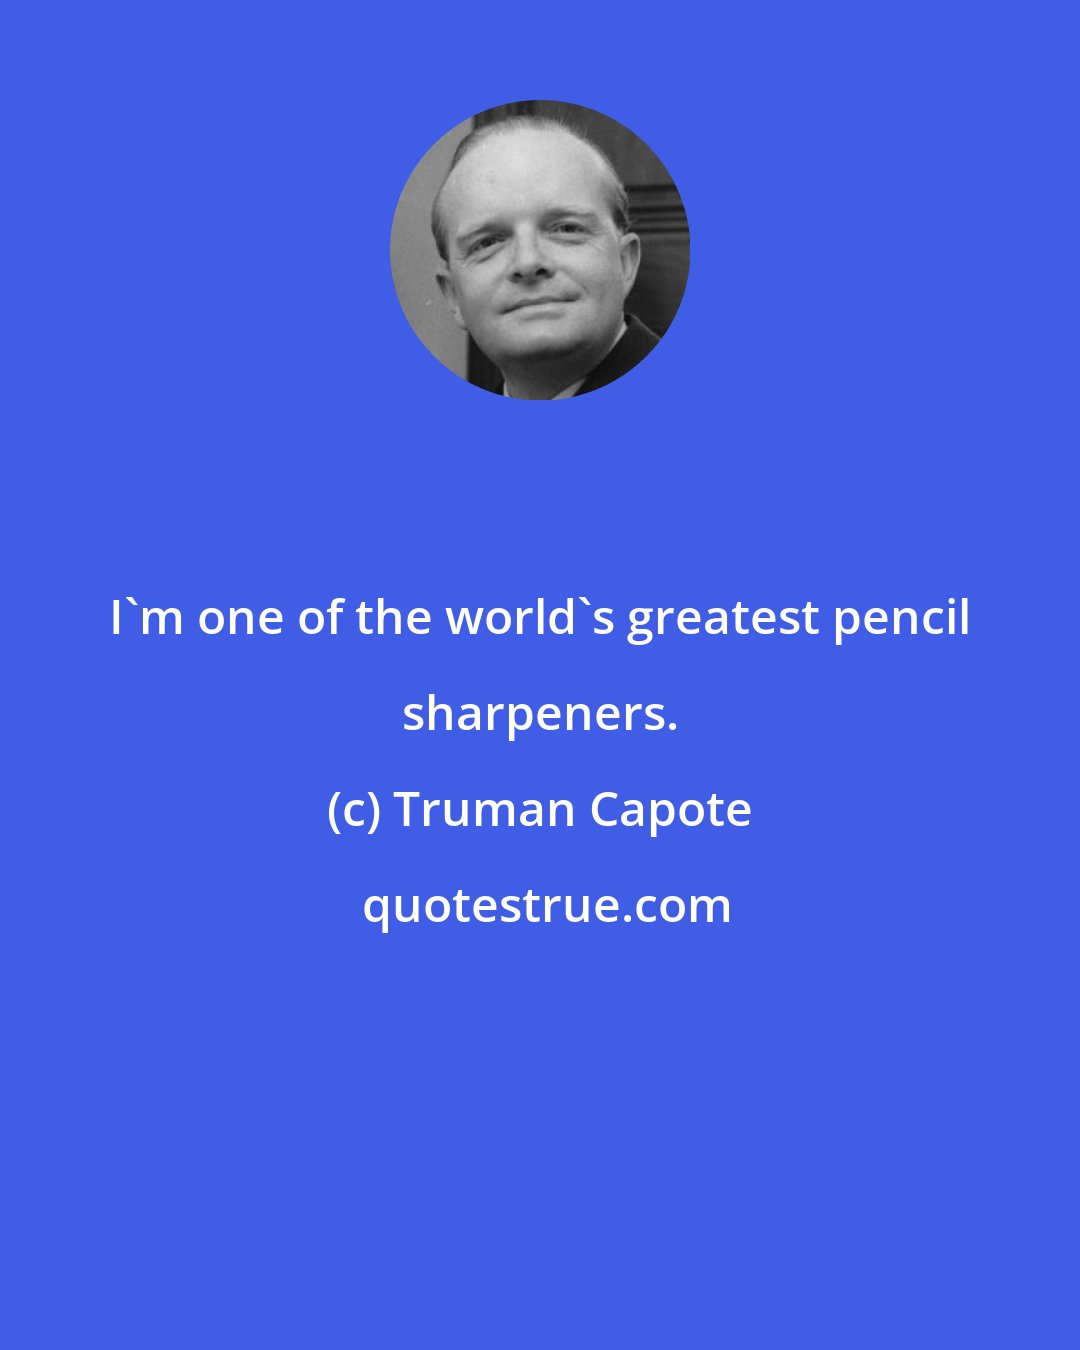 Truman Capote: I'm one of the world's greatest pencil sharpeners.